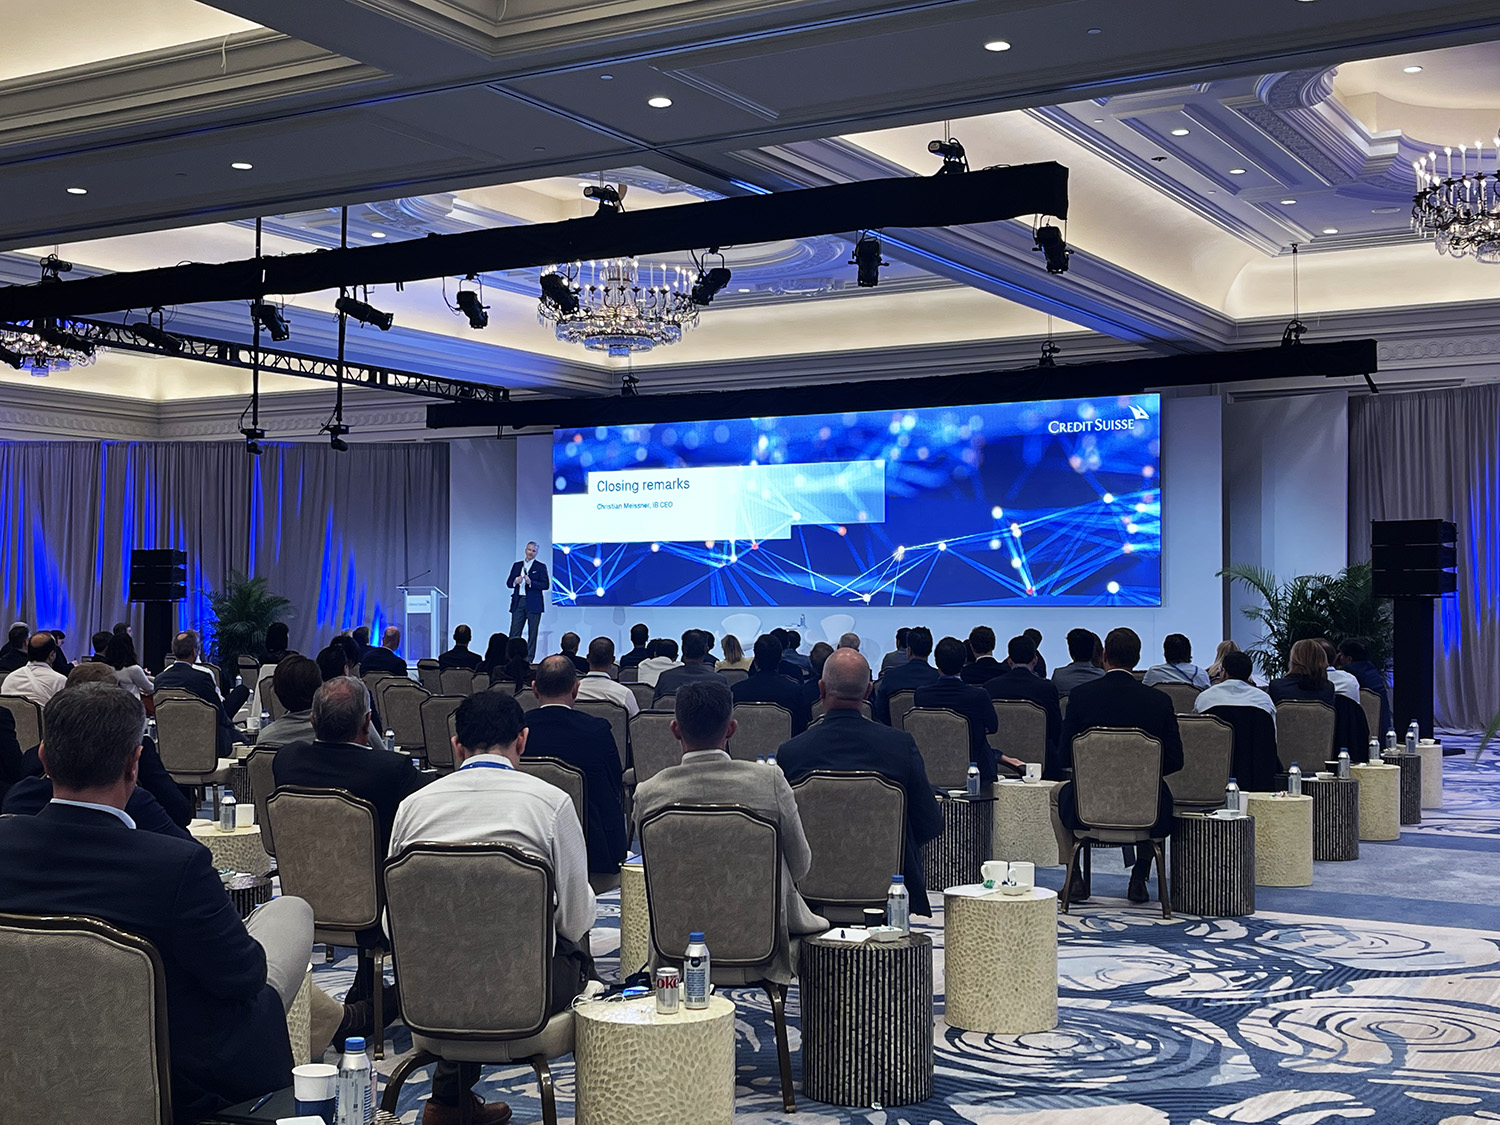 An elegant conference room with attendees facing a stage where a speaker is presenting, with a large screen displaying 'Closing remarks' and a 'Credit Suisse' background.